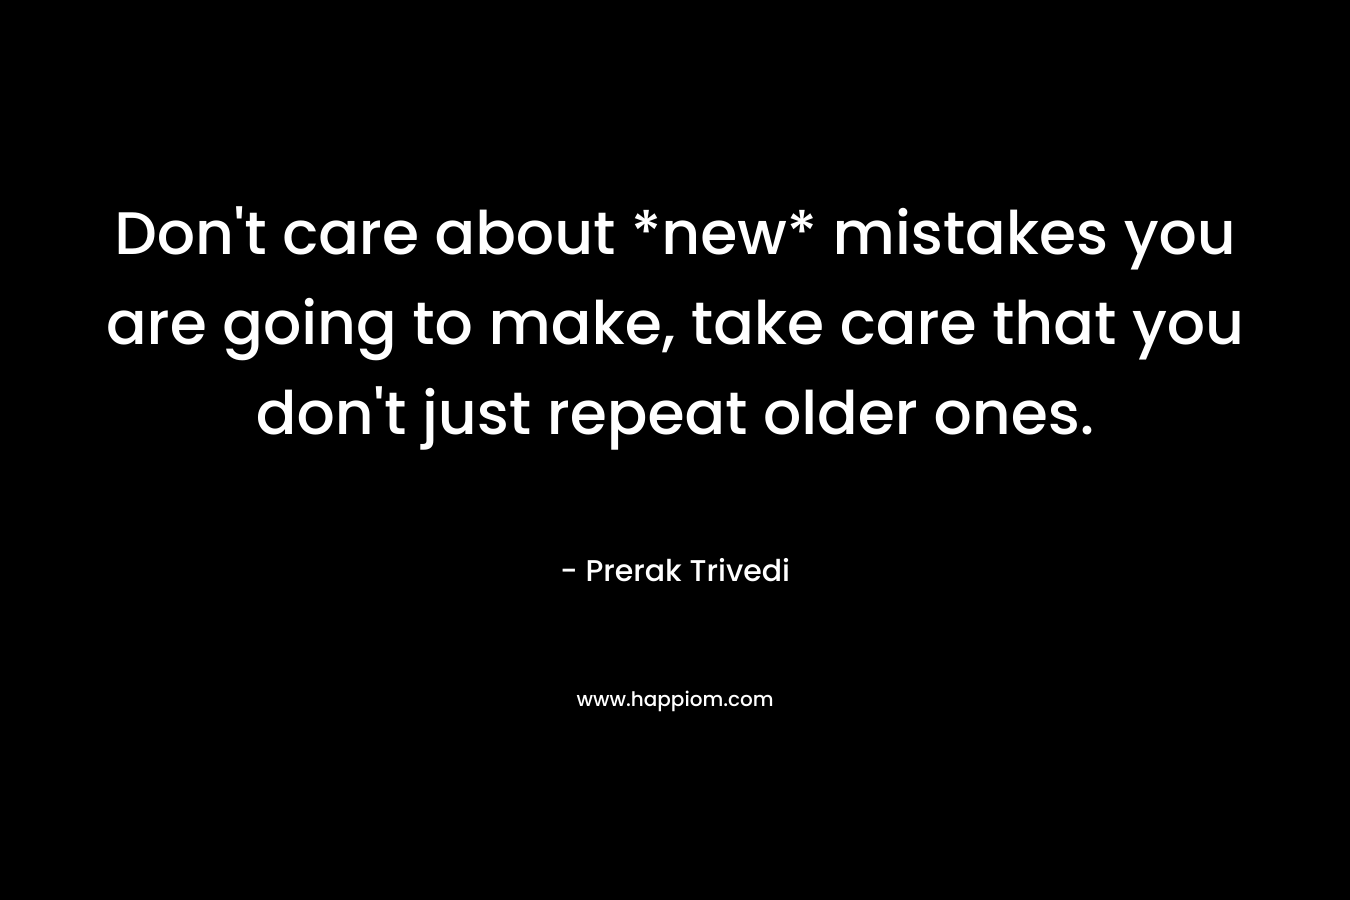 Don't care about *new* mistakes you are going to make, take care that you don't just repeat older ones.